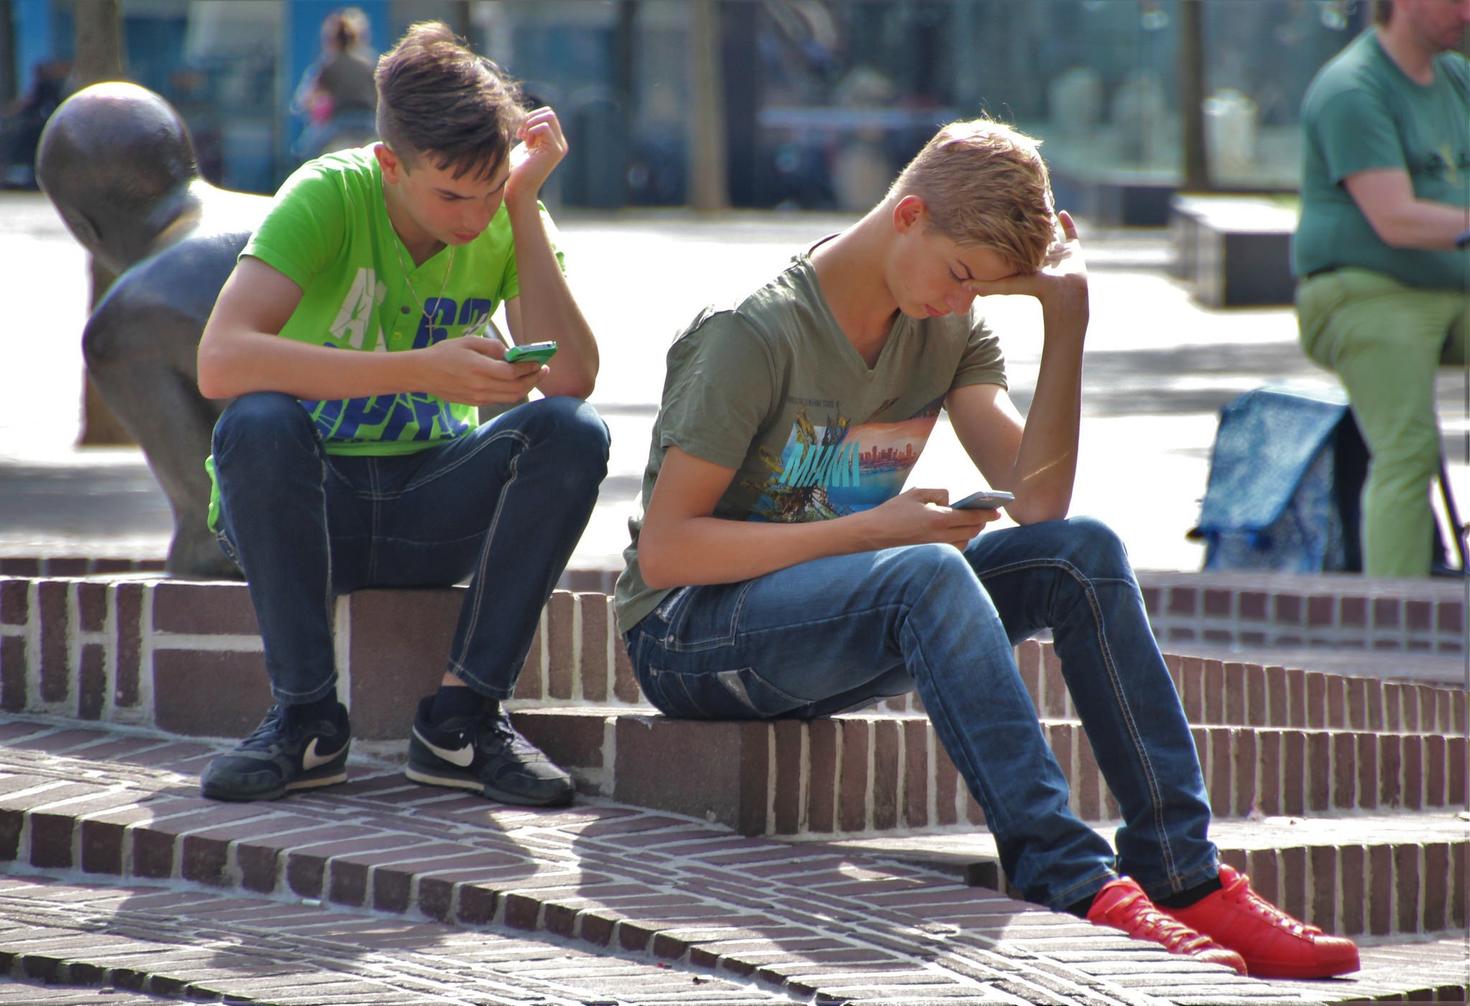 Youth on cellphones